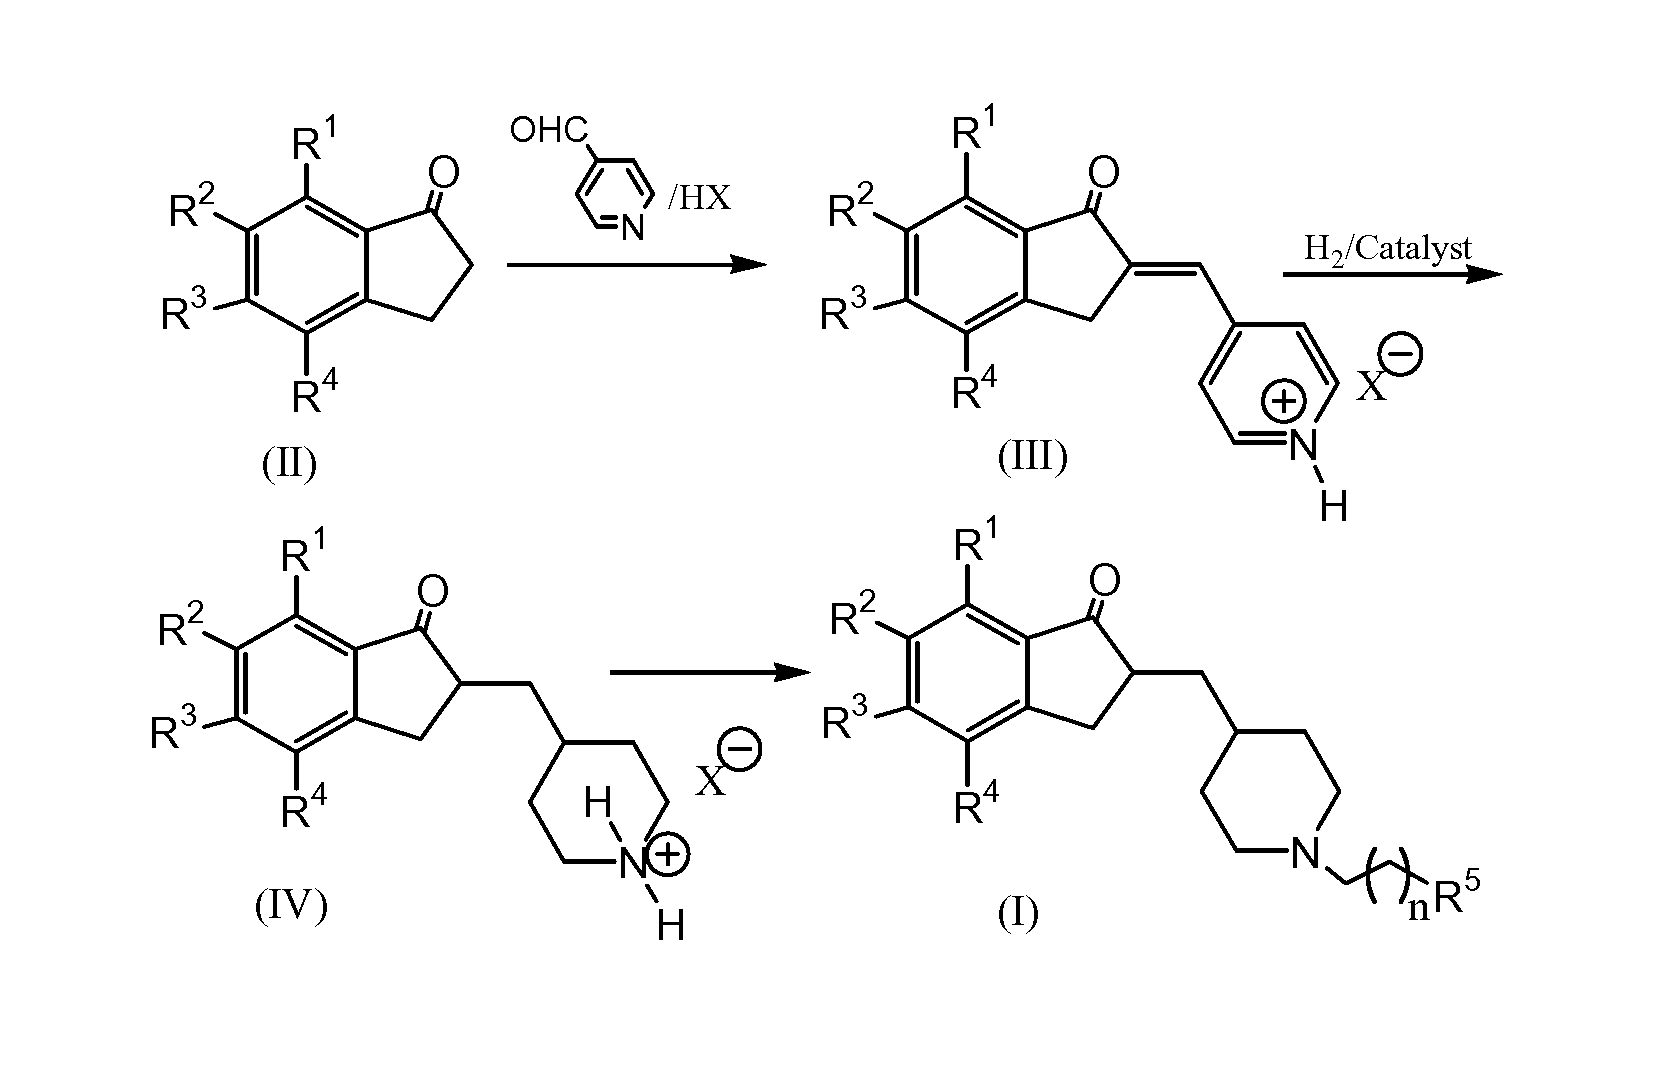 Process for preparing Donepezil and its derivatives